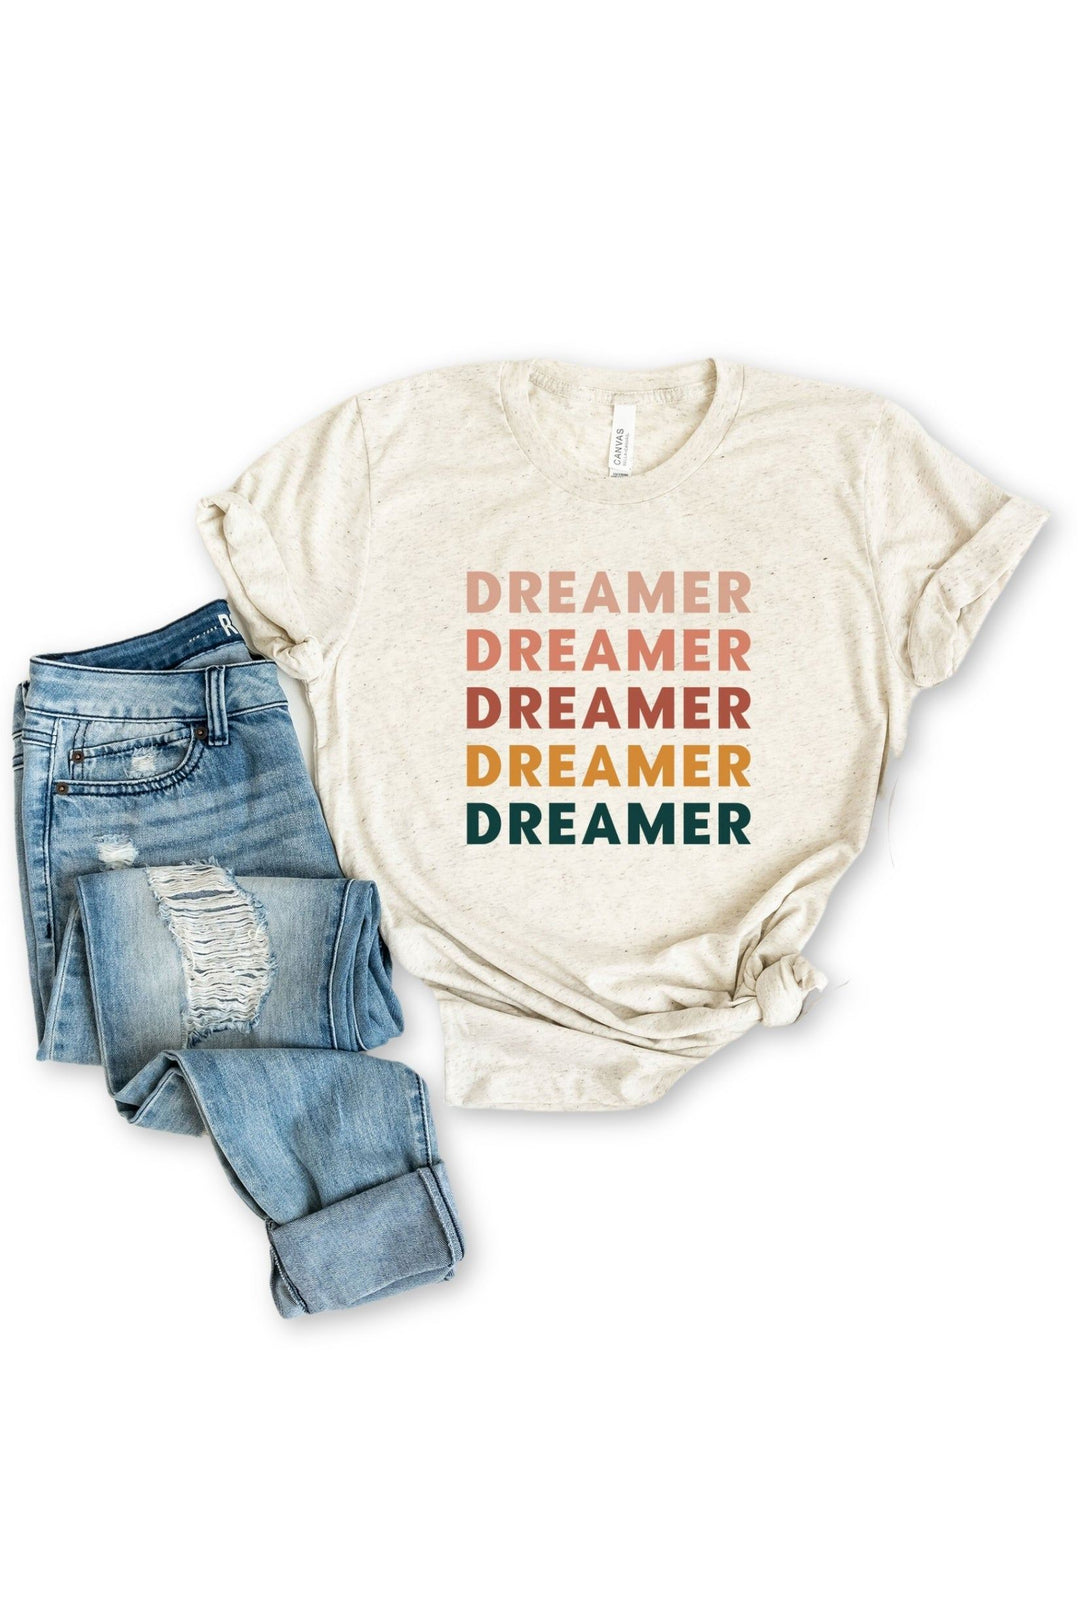 Dreamer Shirt - Graphic Tee - Bella Canvas - Inspired Eye Boutique